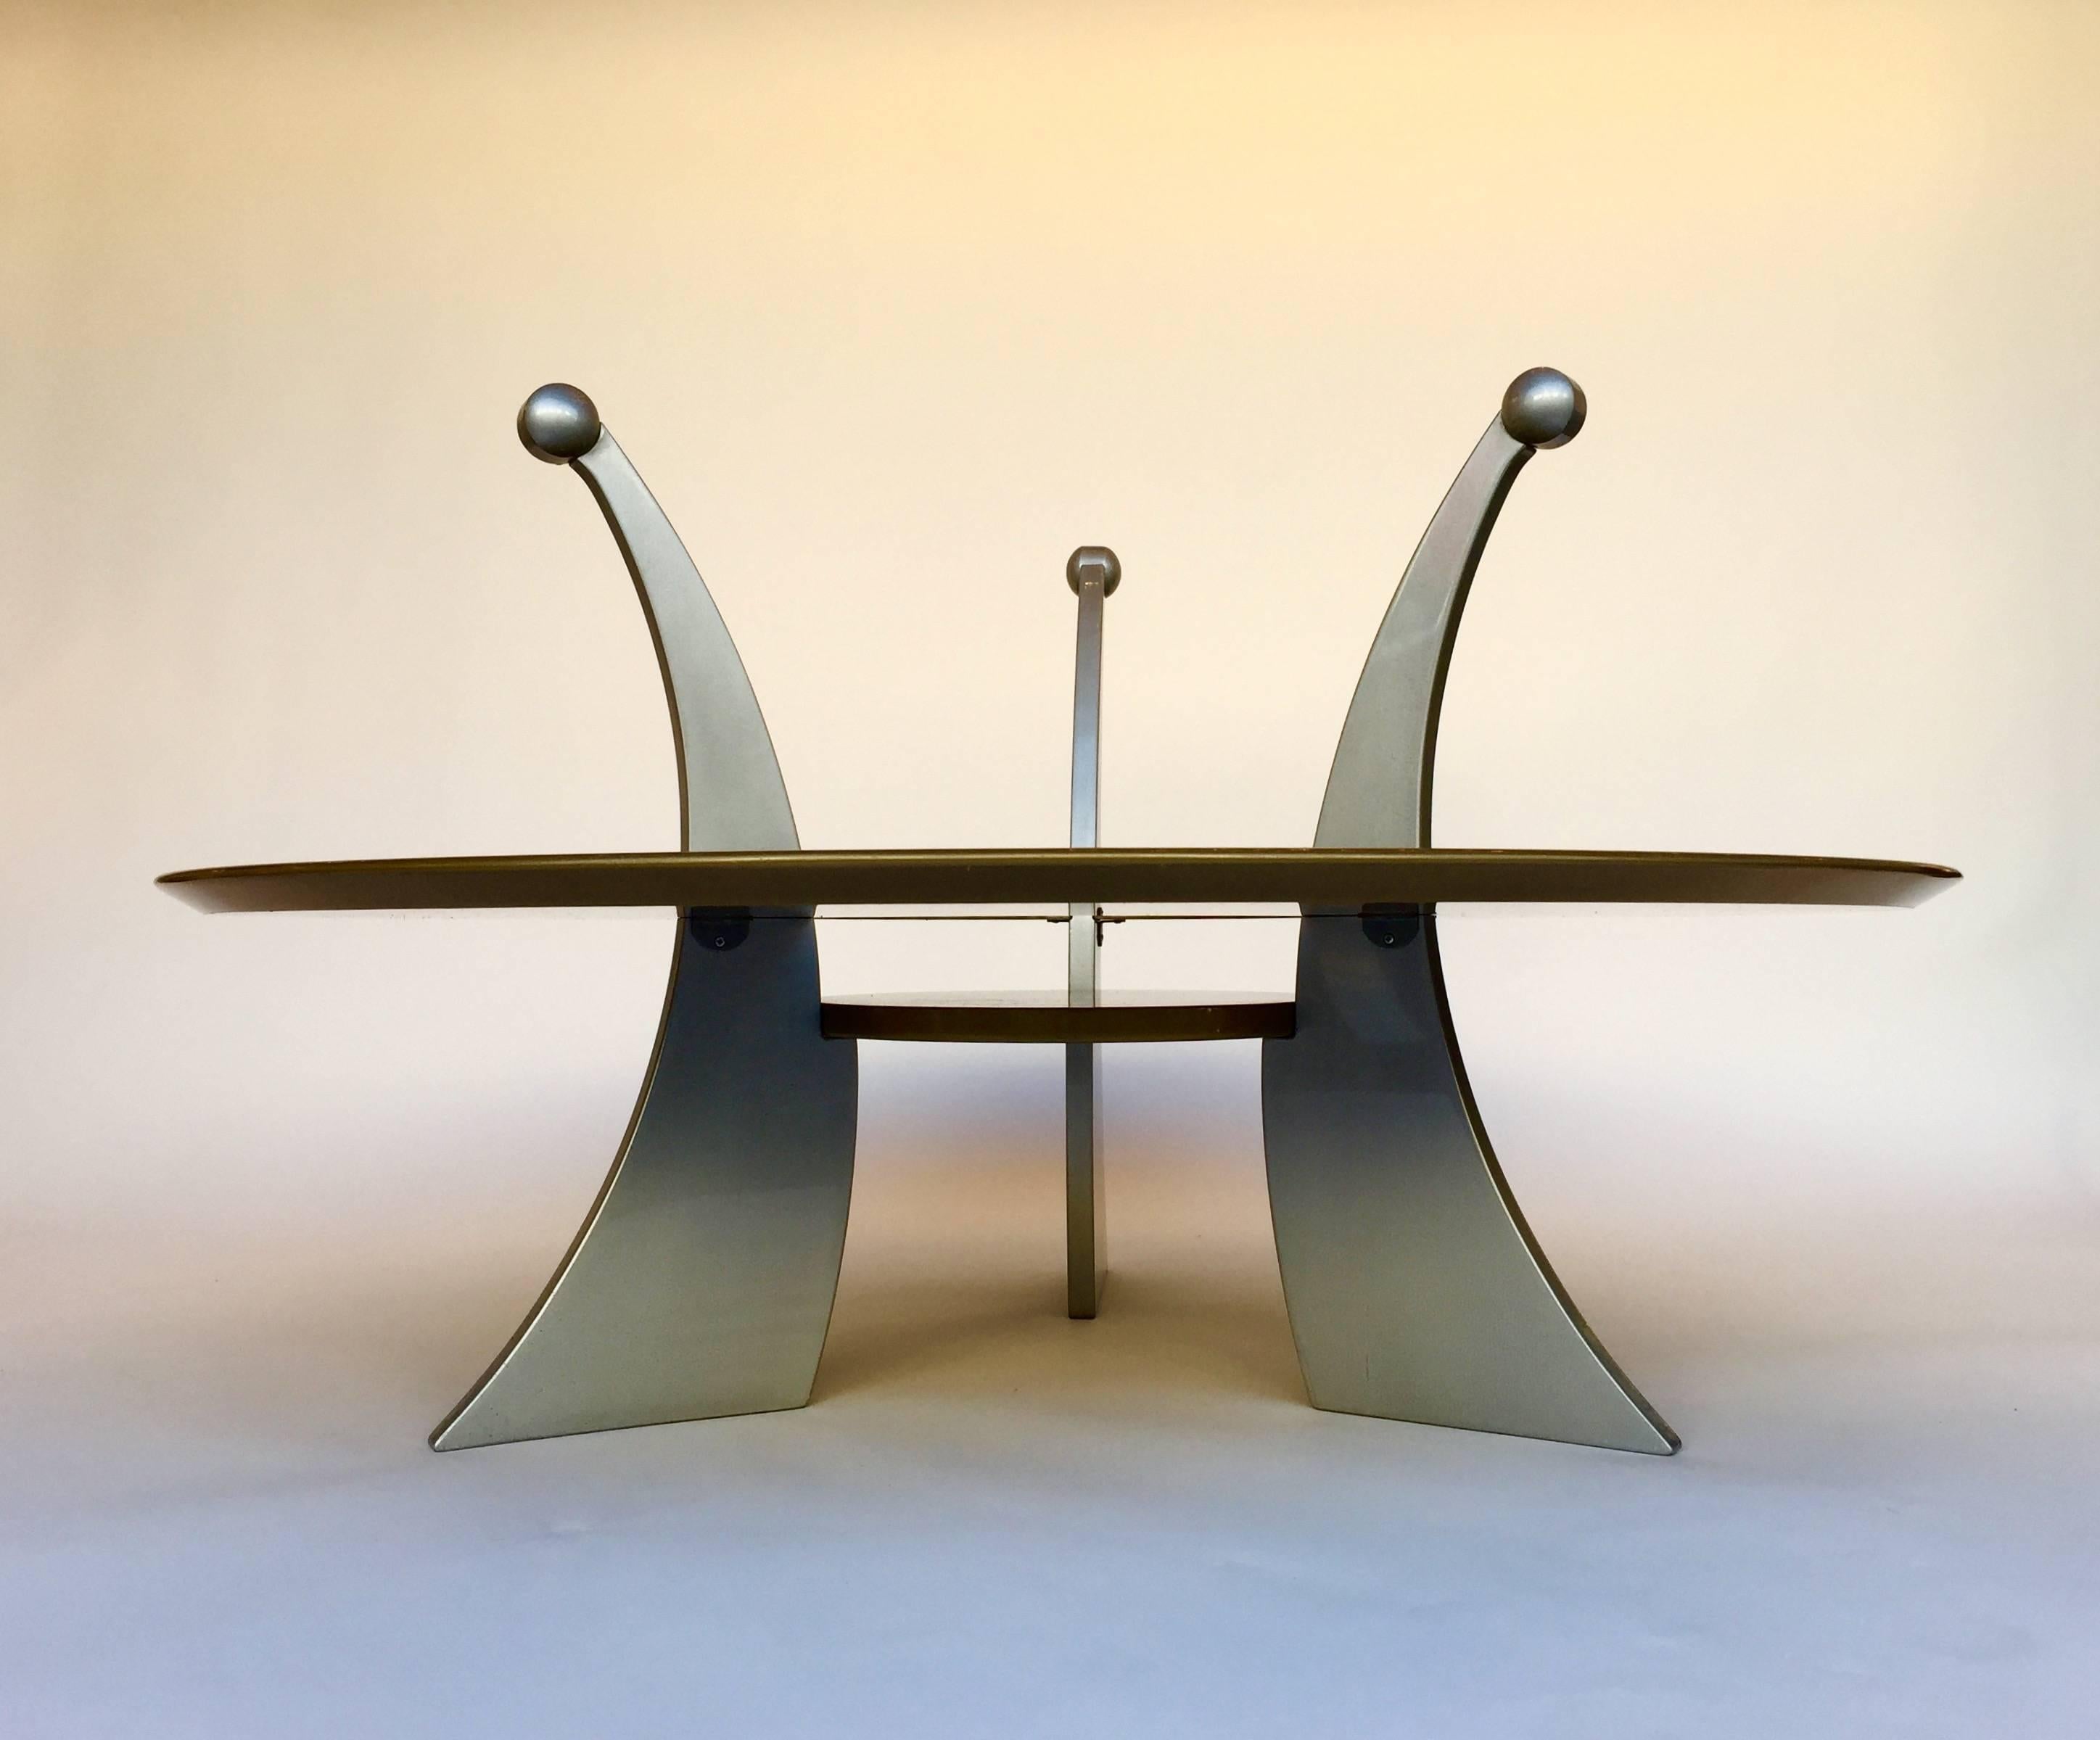 Coffee low or cocktail table orchid or orchidea by Massimo Morozzi. Mordore and silver metal lacquered. Very interesting sculptural model. Quite rare and few edition in the 1980s. An italian design, Massimo Morozzi is one of the founder of Archizoom